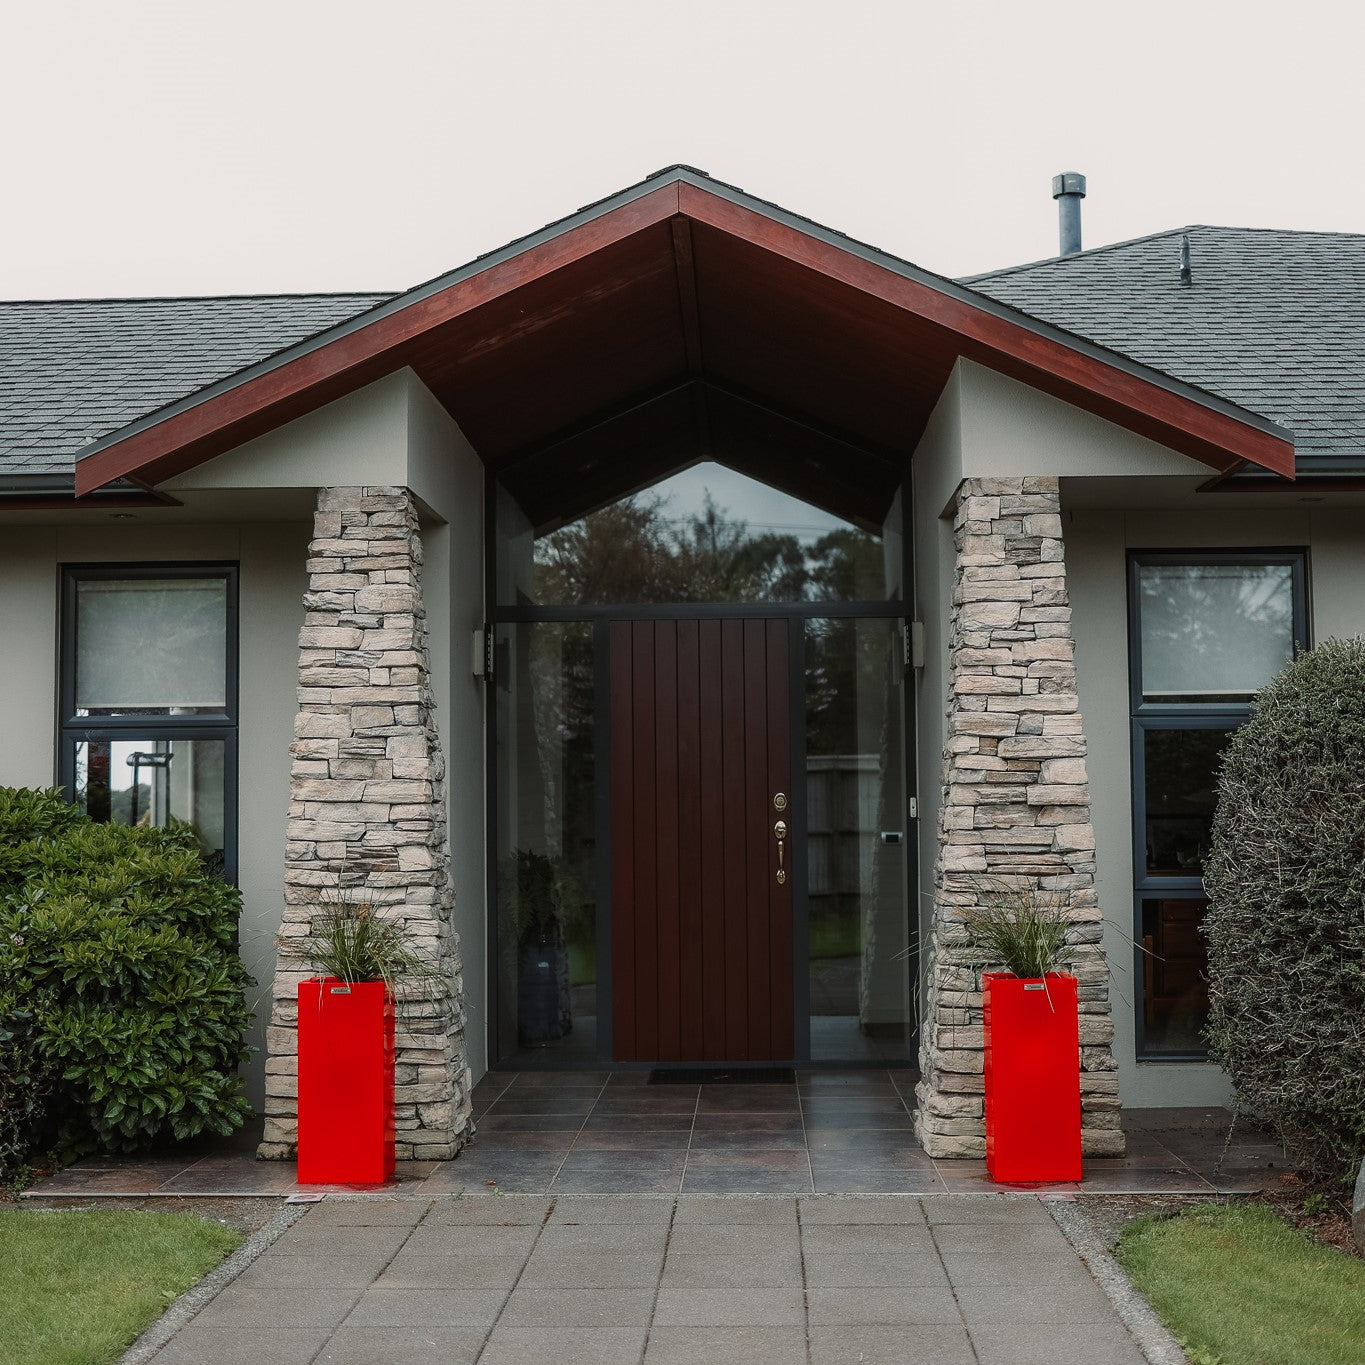 2 square red planter pots at a house entrance in New Zealand.